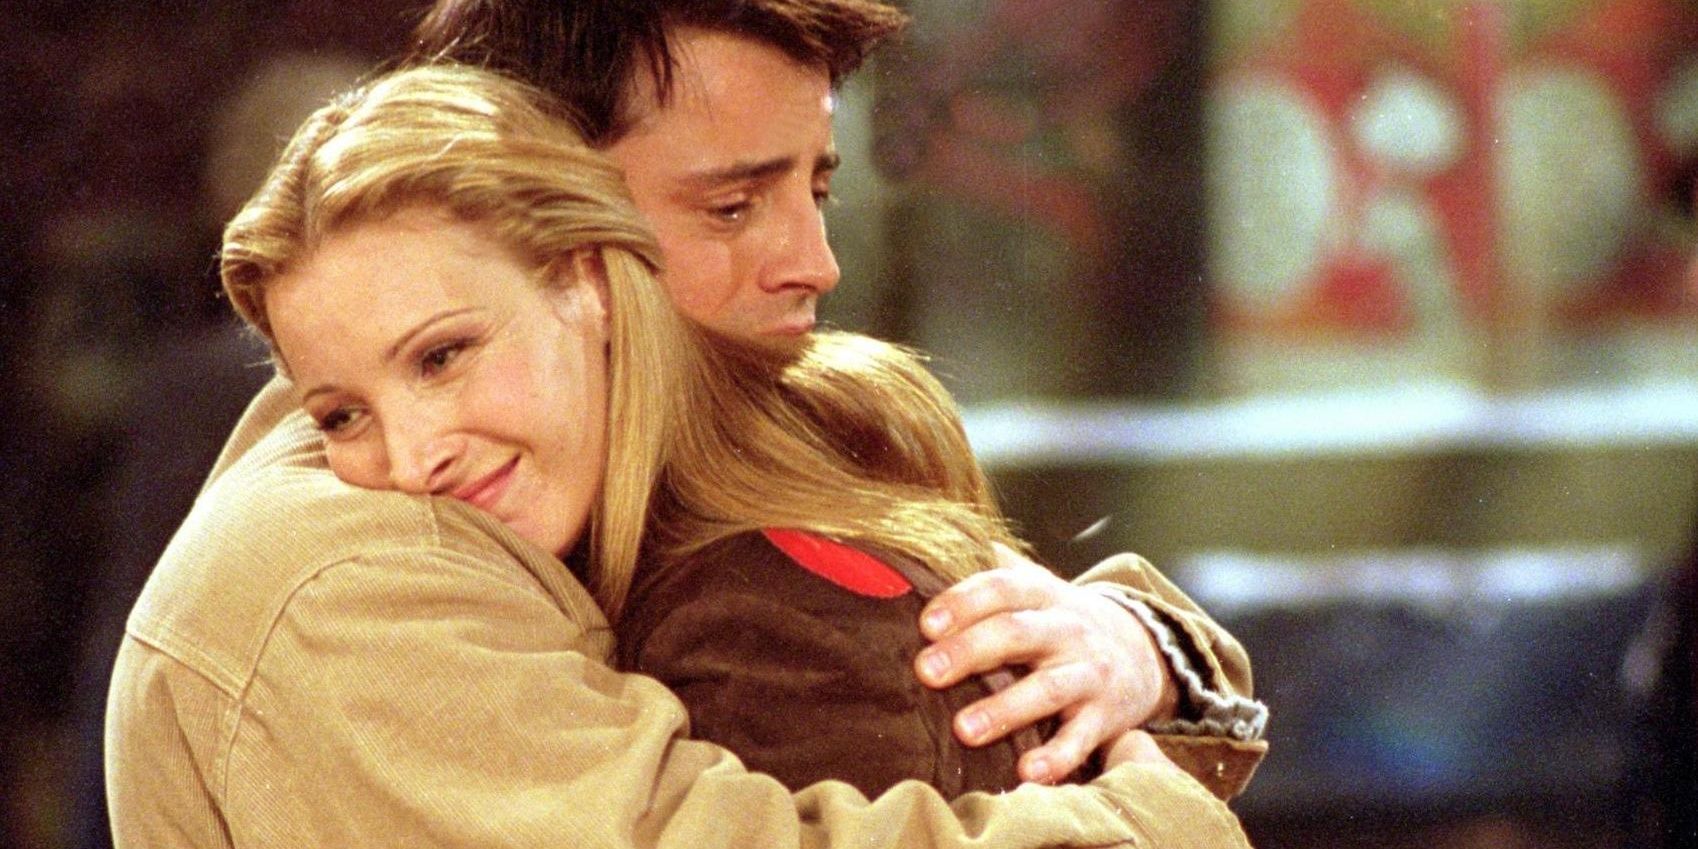 10 Friendship Tips We Learned From Friends